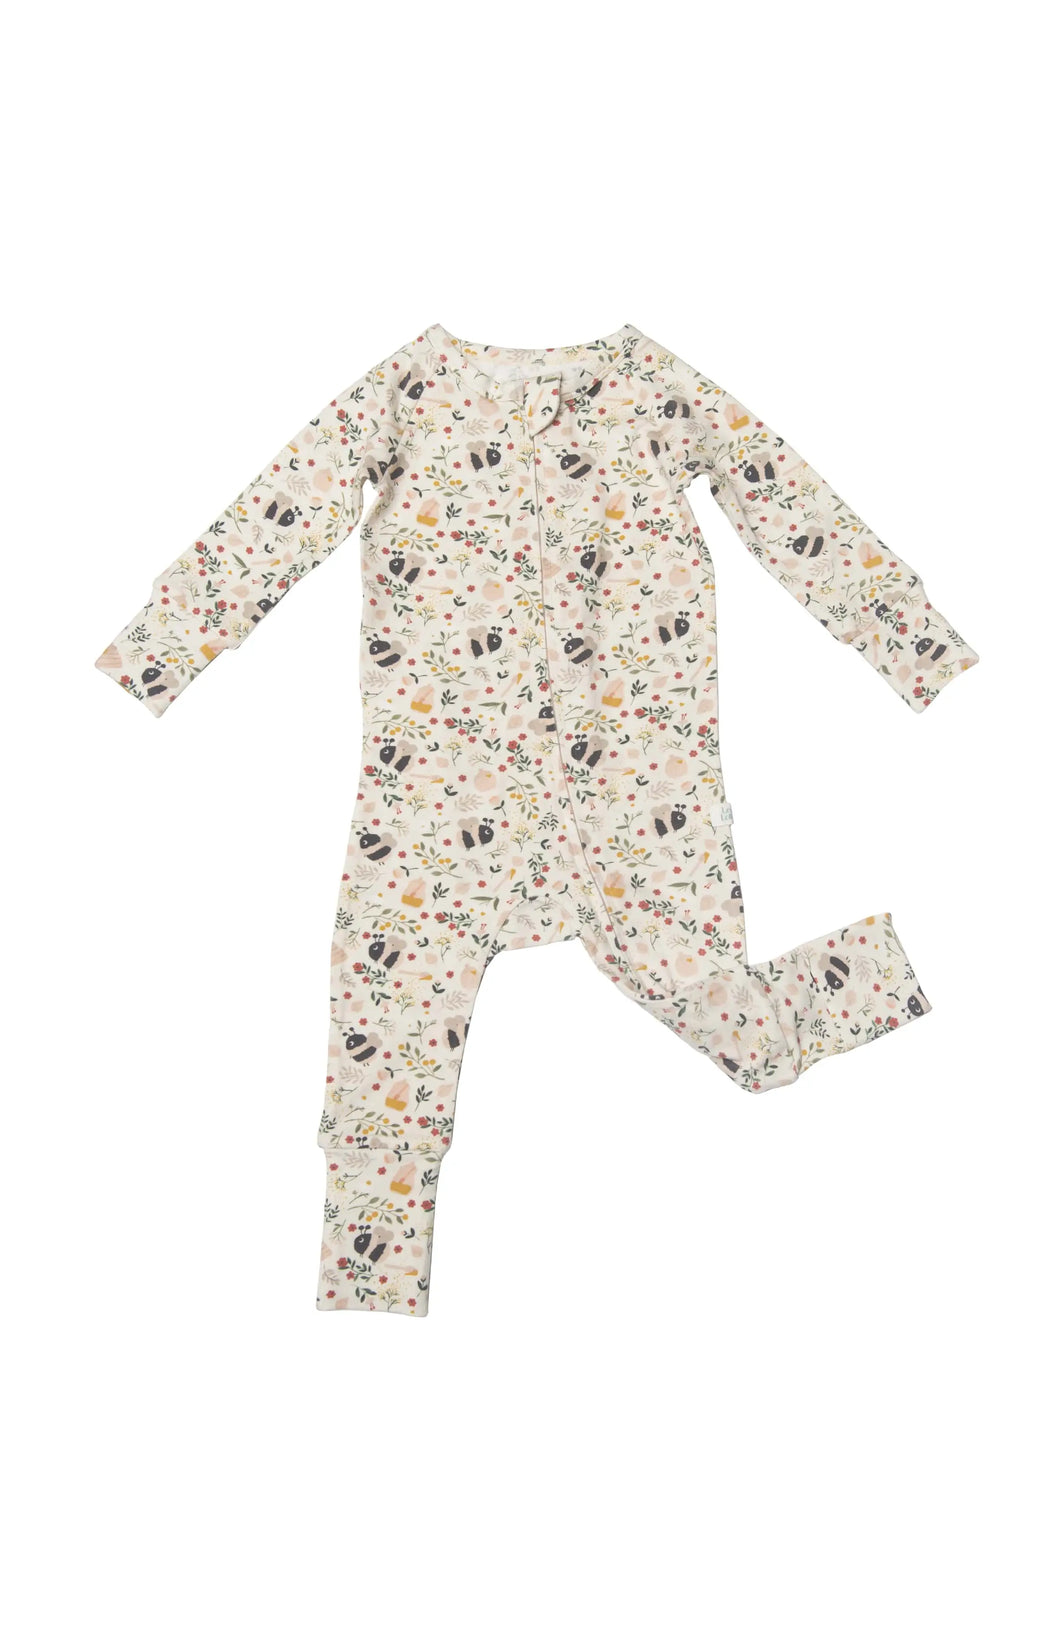 Sleeper with fold over hands and feet with a bumble bee print. Zipper down the middle to feet. 